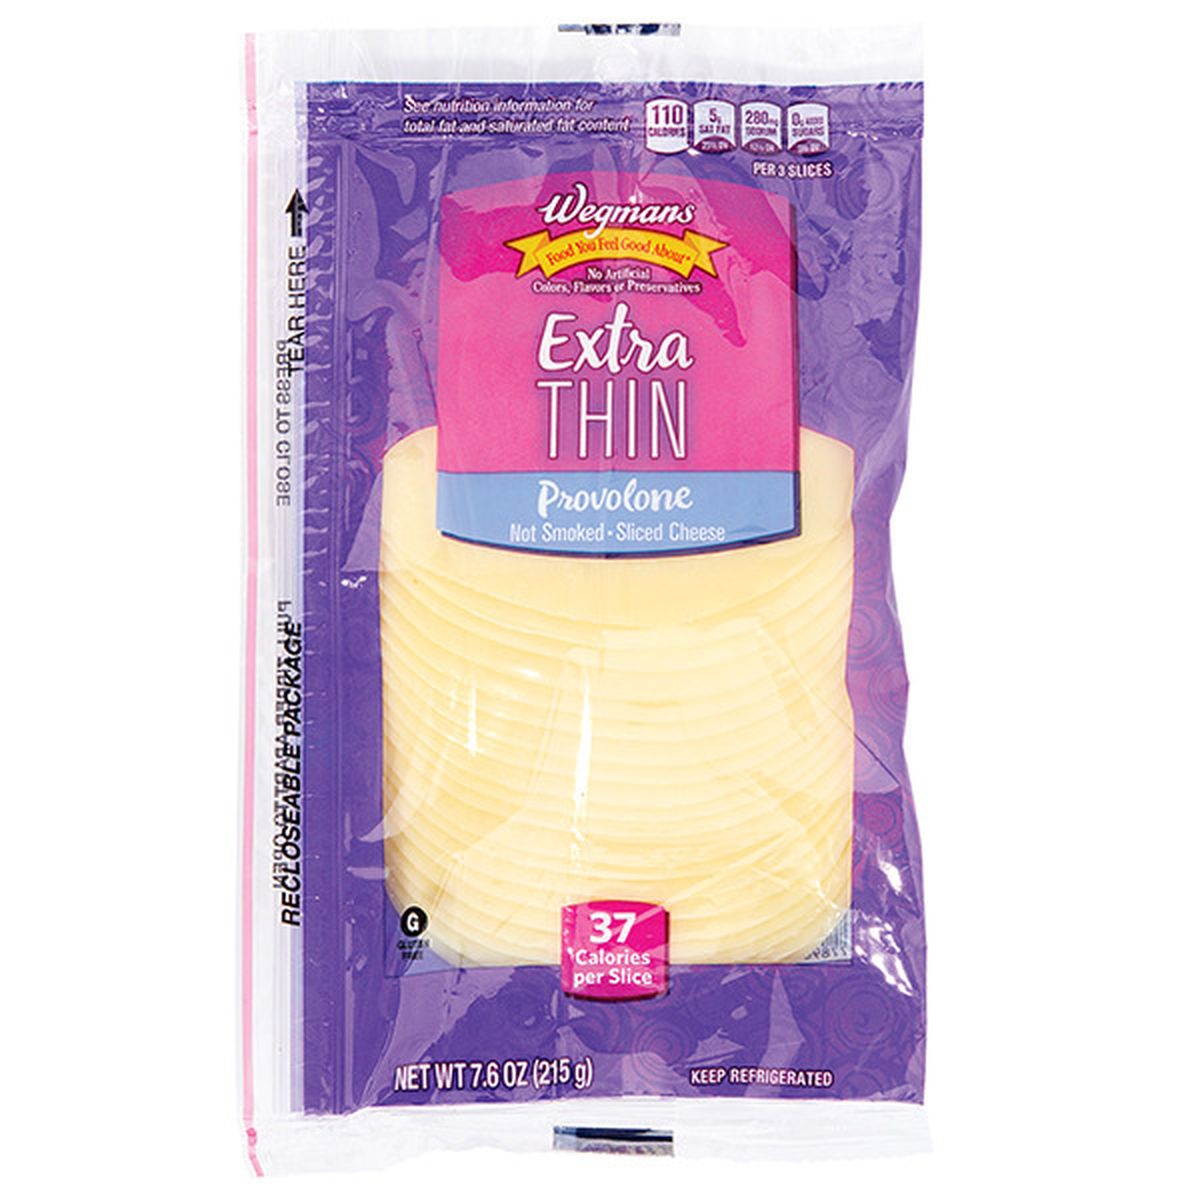 Calories in Wegmans Extra Thin Sliced Provolone Cheese, 20 Slices